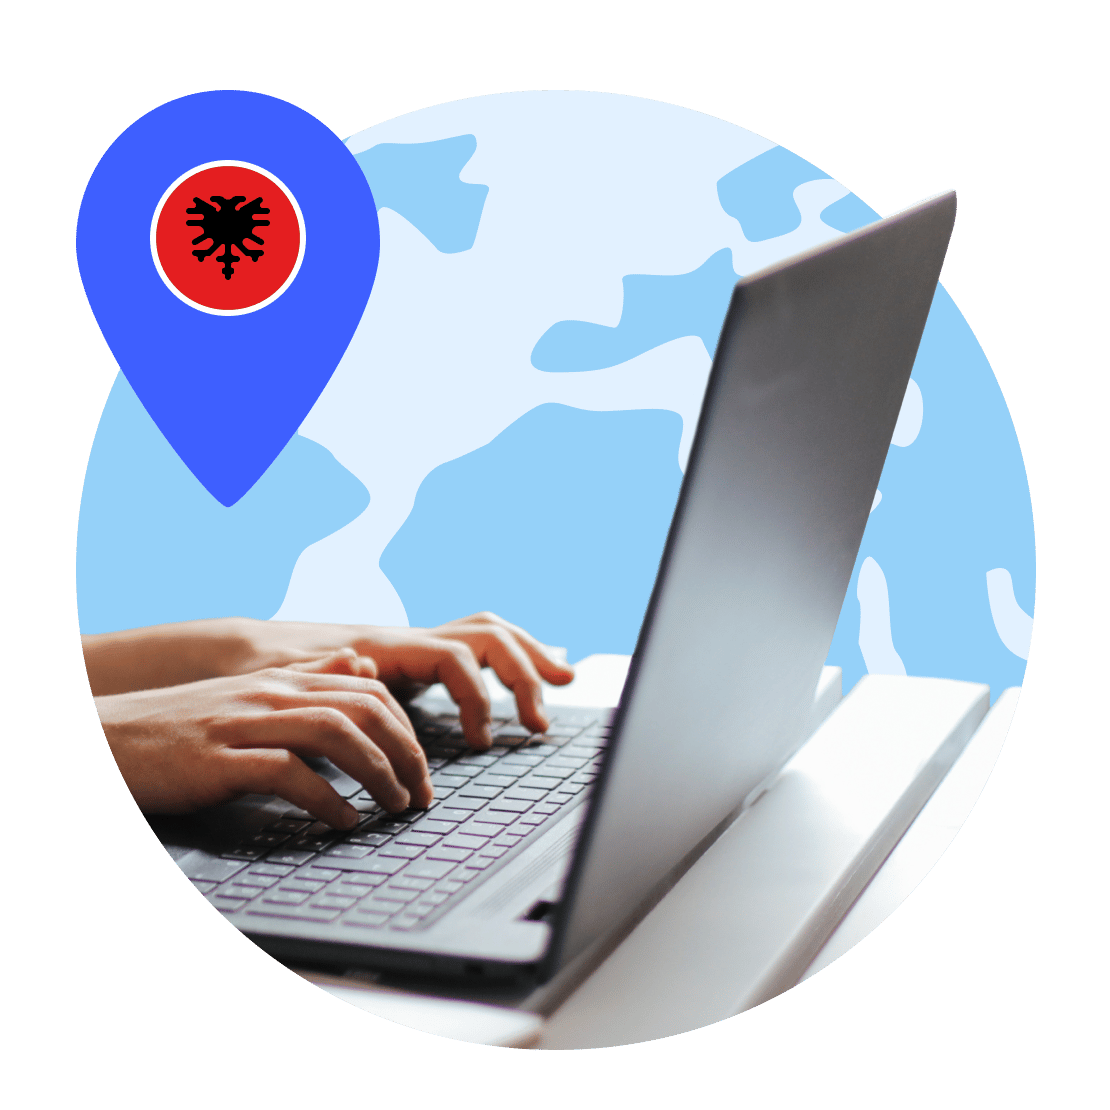 Connect to Albanian VPN servers and browse safely.